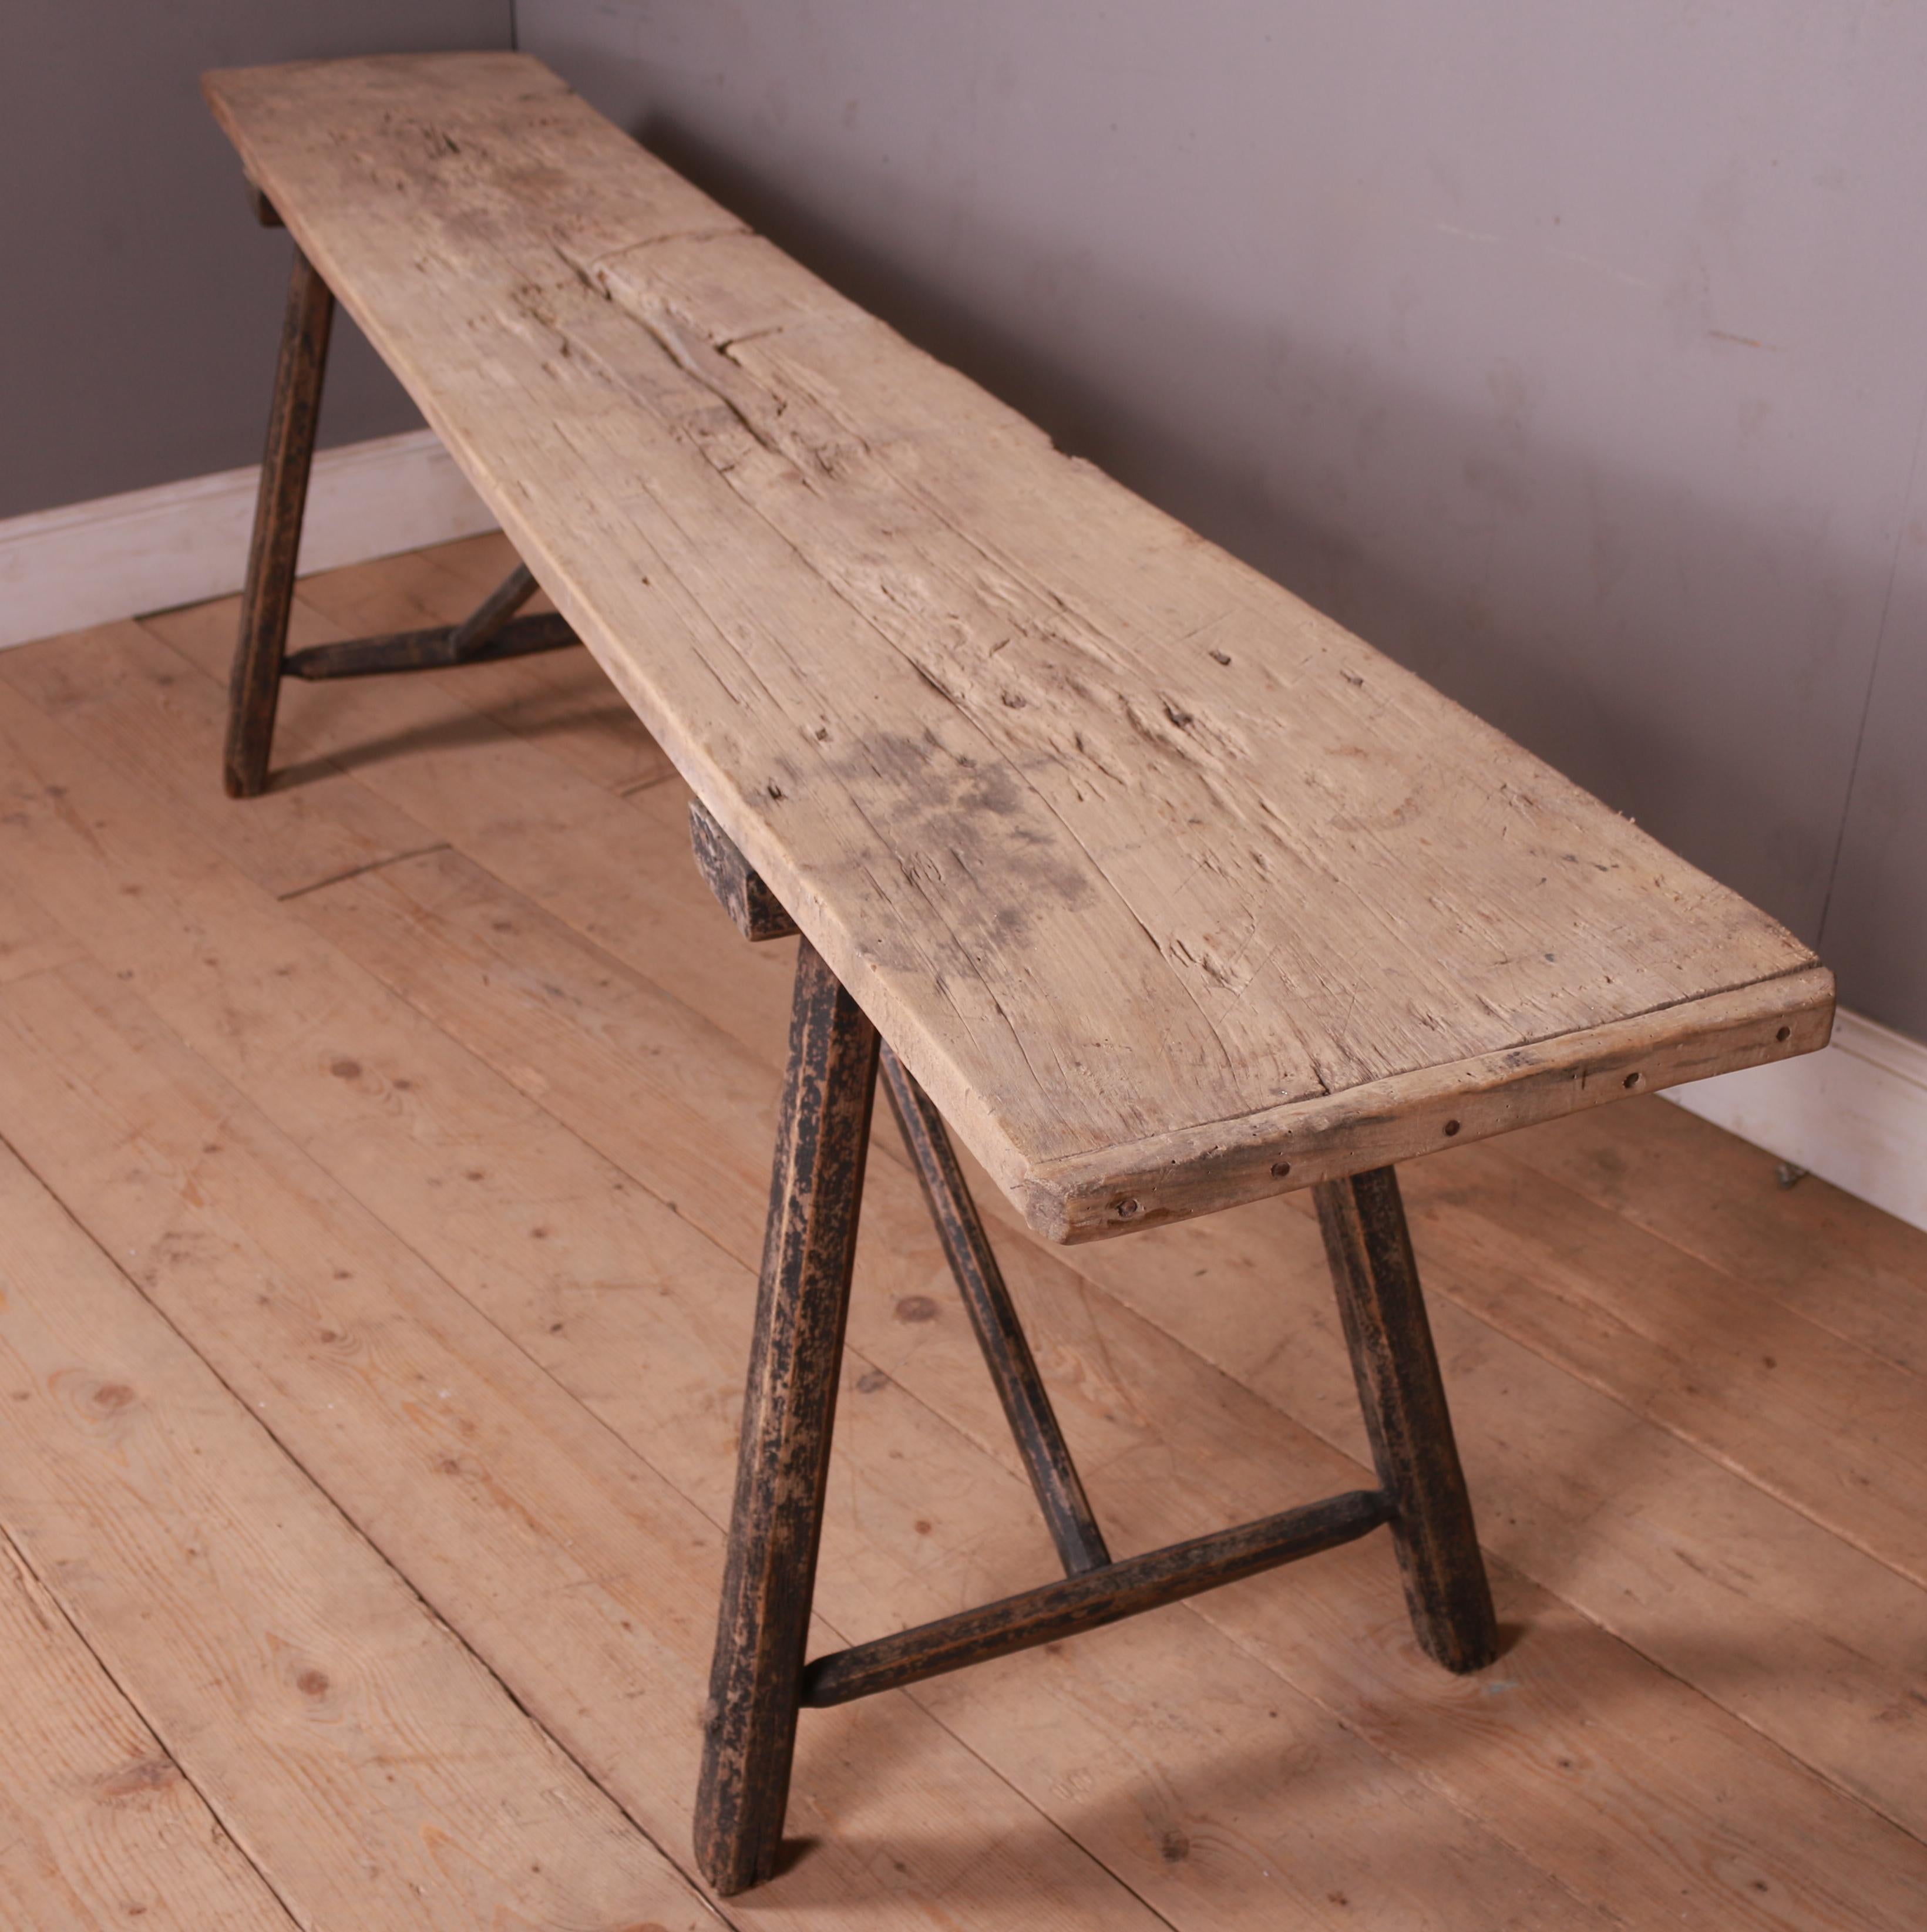 Long 19th C French rustic trestle table with worn old black paint. 1880.

Top is 16